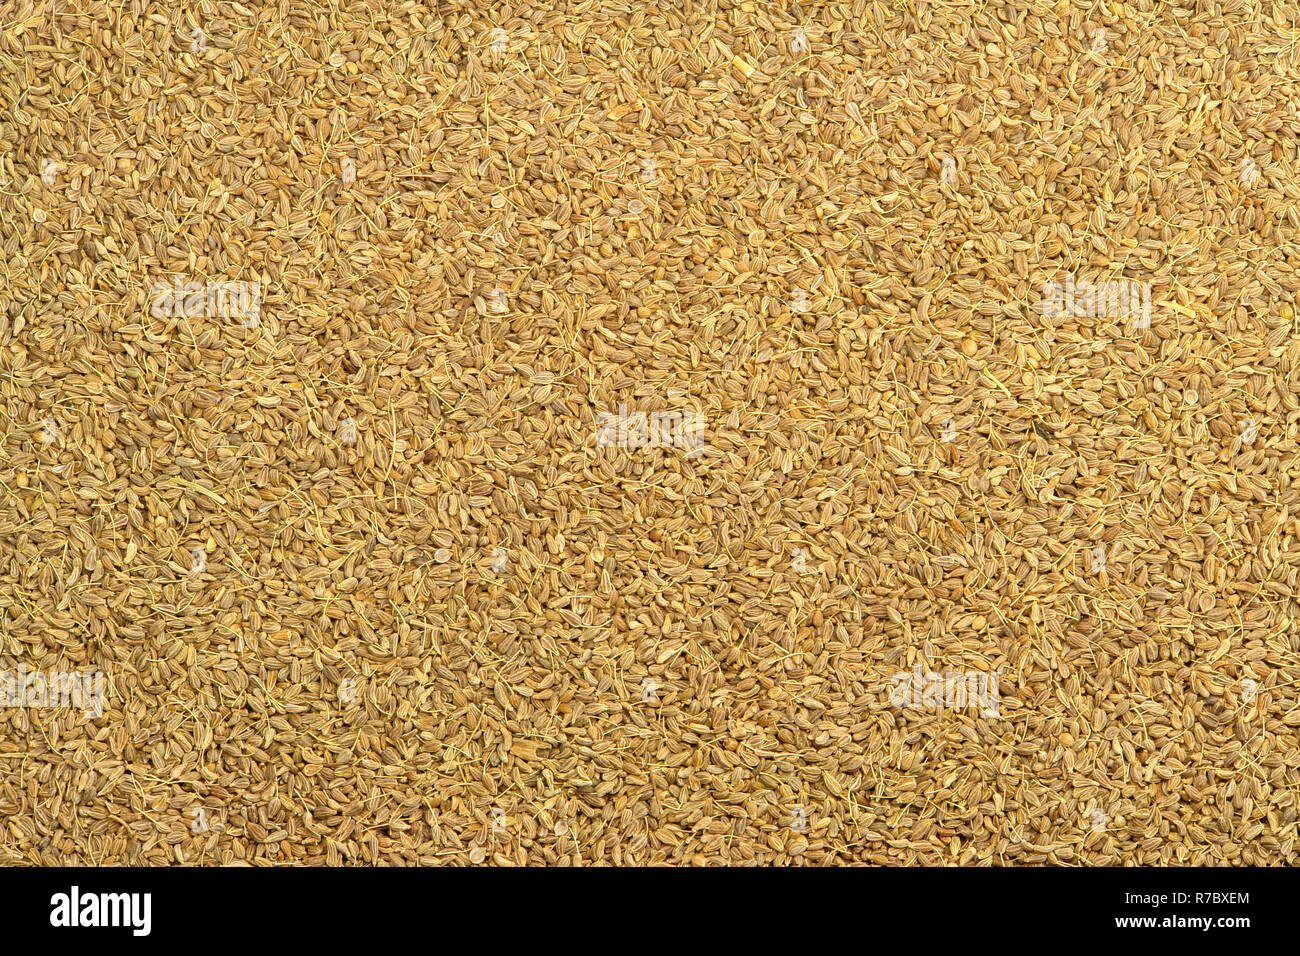 Anise Seed Texture Stock Photo